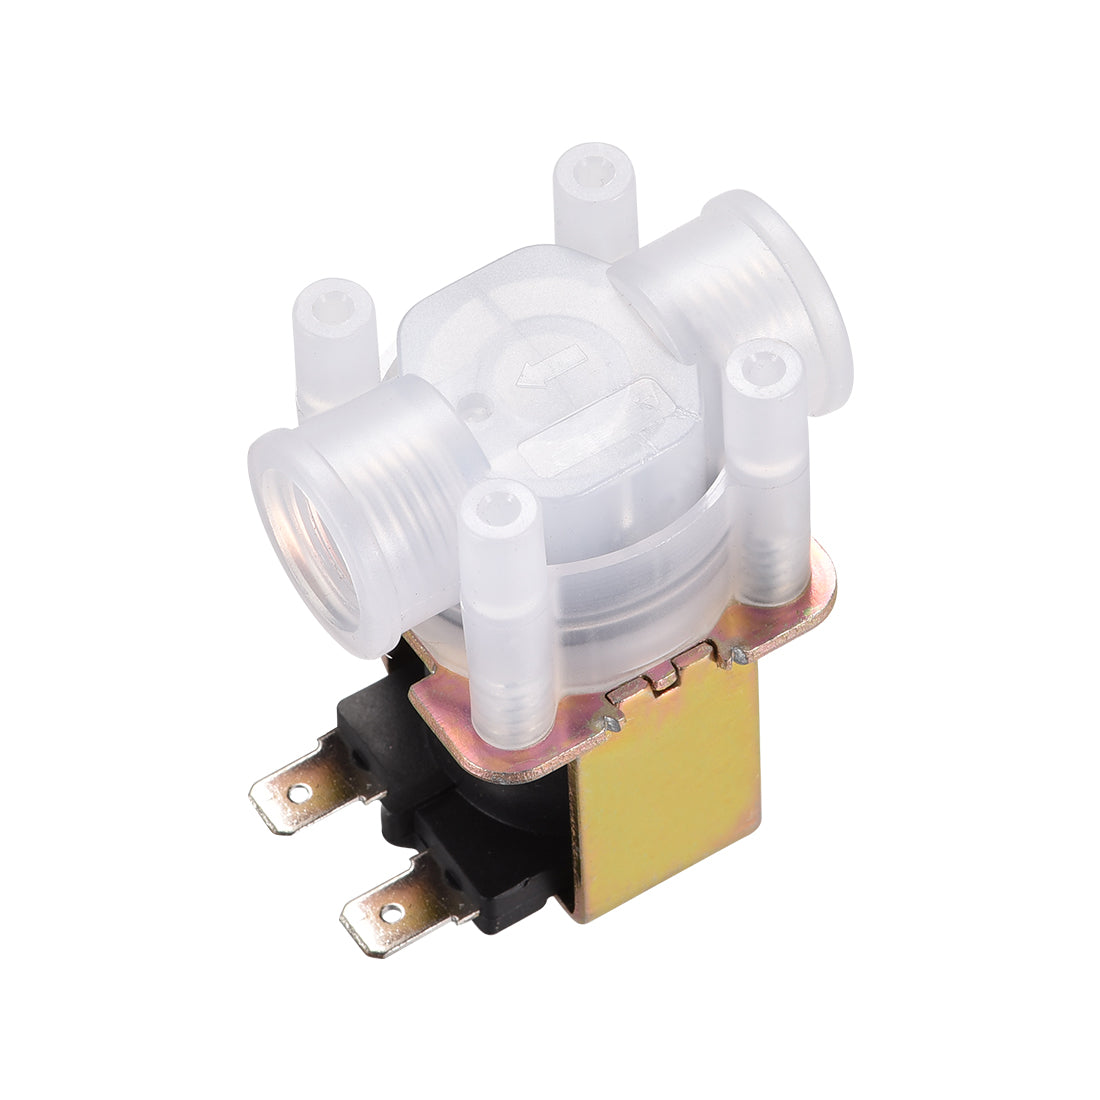 uxcell Uxcell DC12V G1/4 Female Brass Water Electric Solenoid Valve Normally Closed N/C Pressure Water Inlet Flow Switch Electric Magnetic Valve